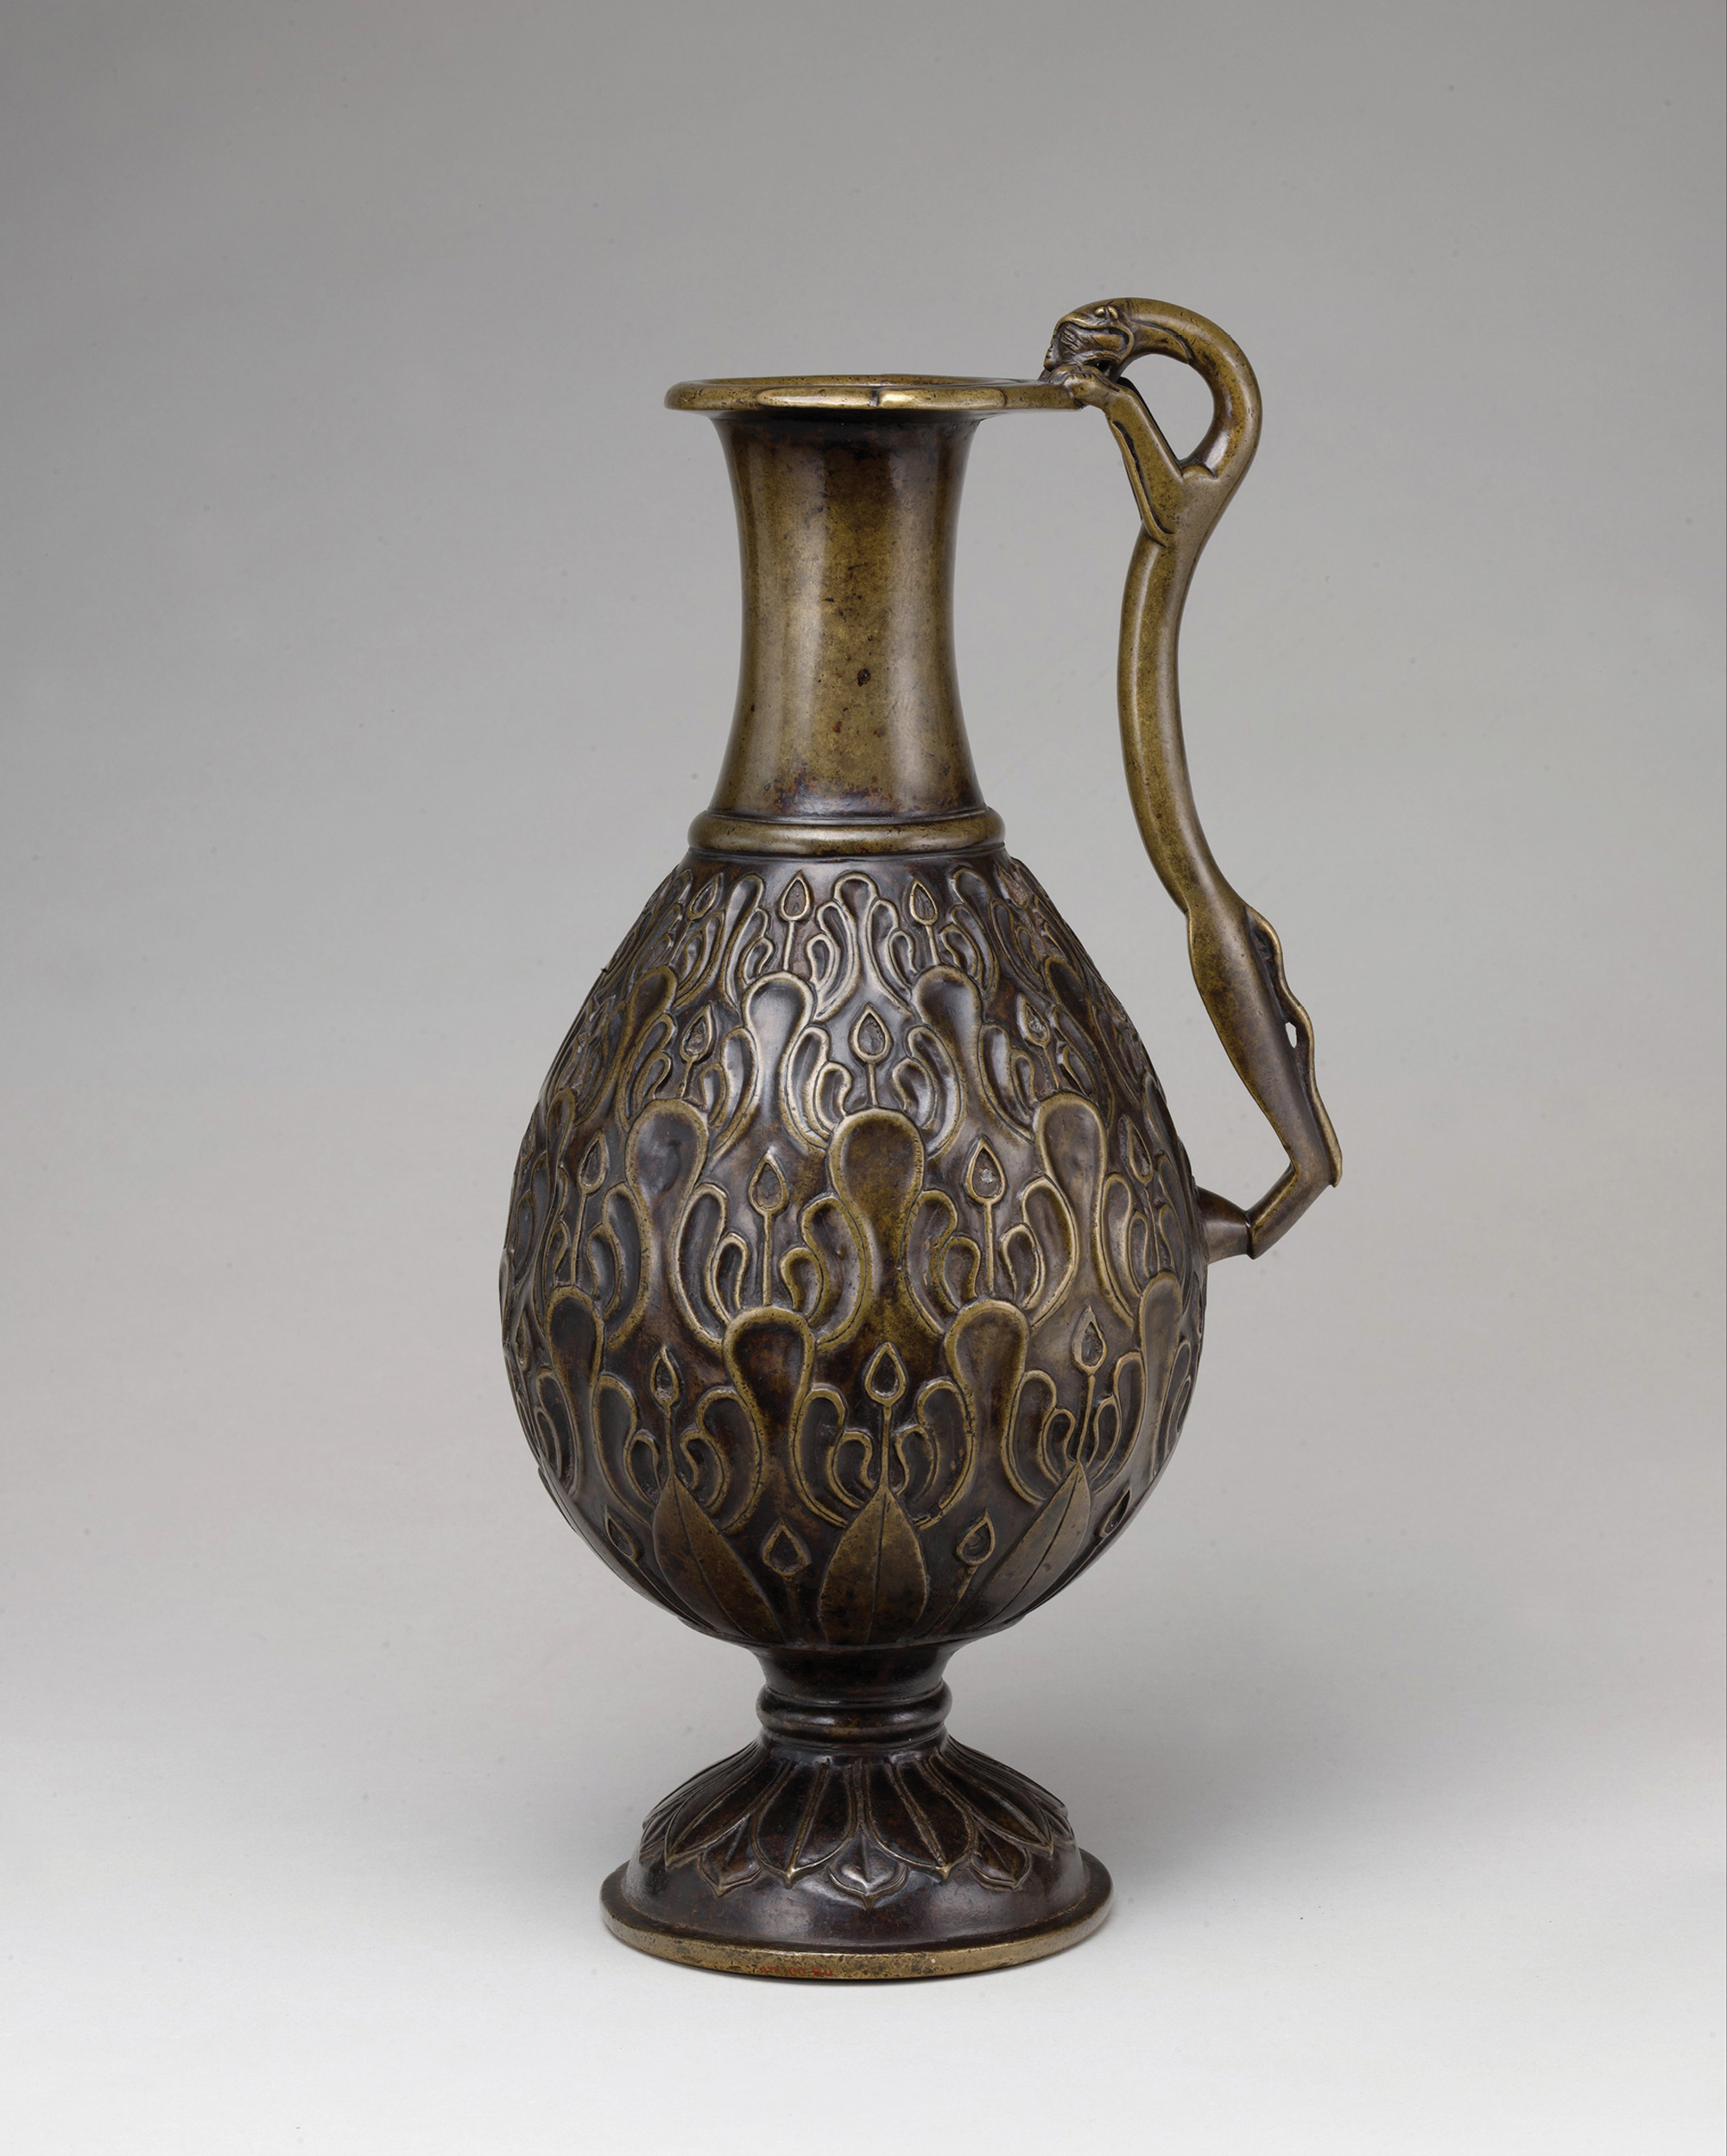 A photograph of an Iranian ewer from the seventh century. The elongated cat that forms the handle is peering at the heads of two birds depicted on the rim of the vessel. 